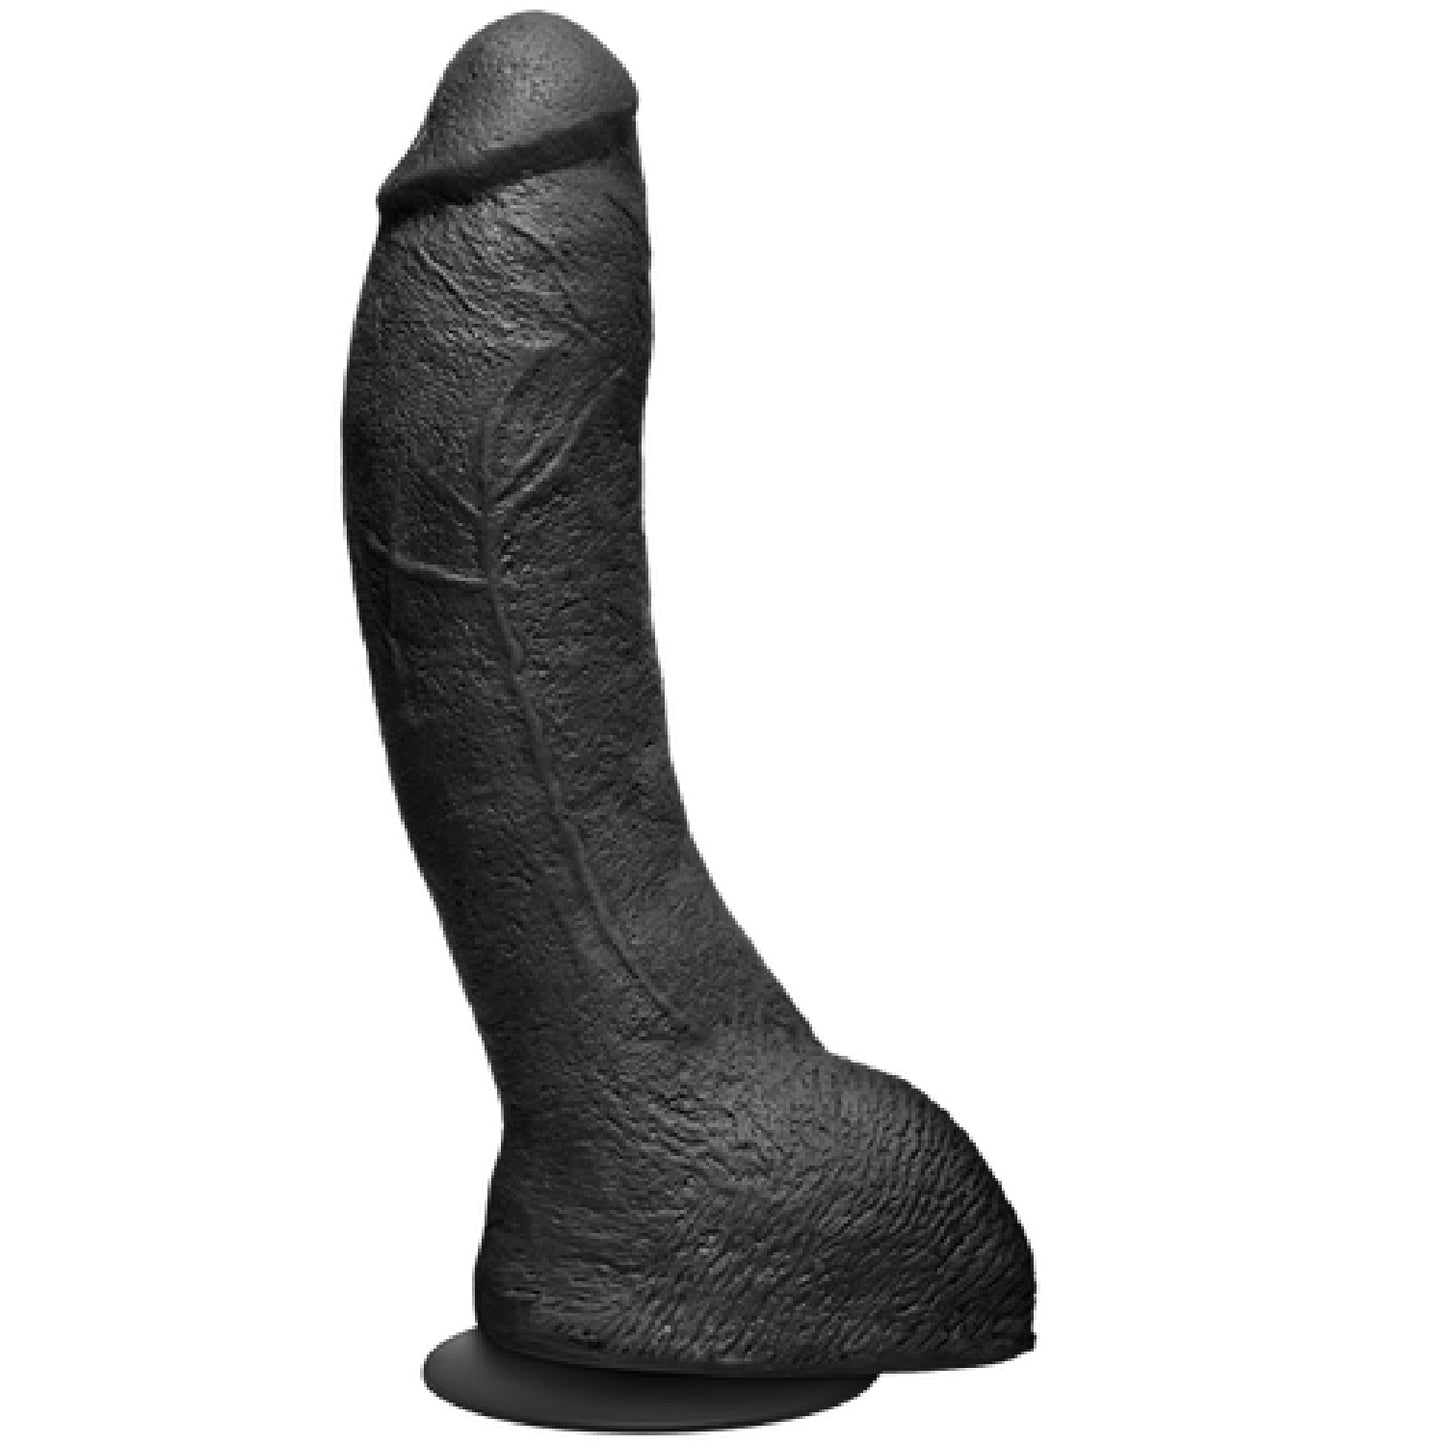 The Perfect P-Spot Cock With Removable Vac-U-Lock Suction Cup  - Club X